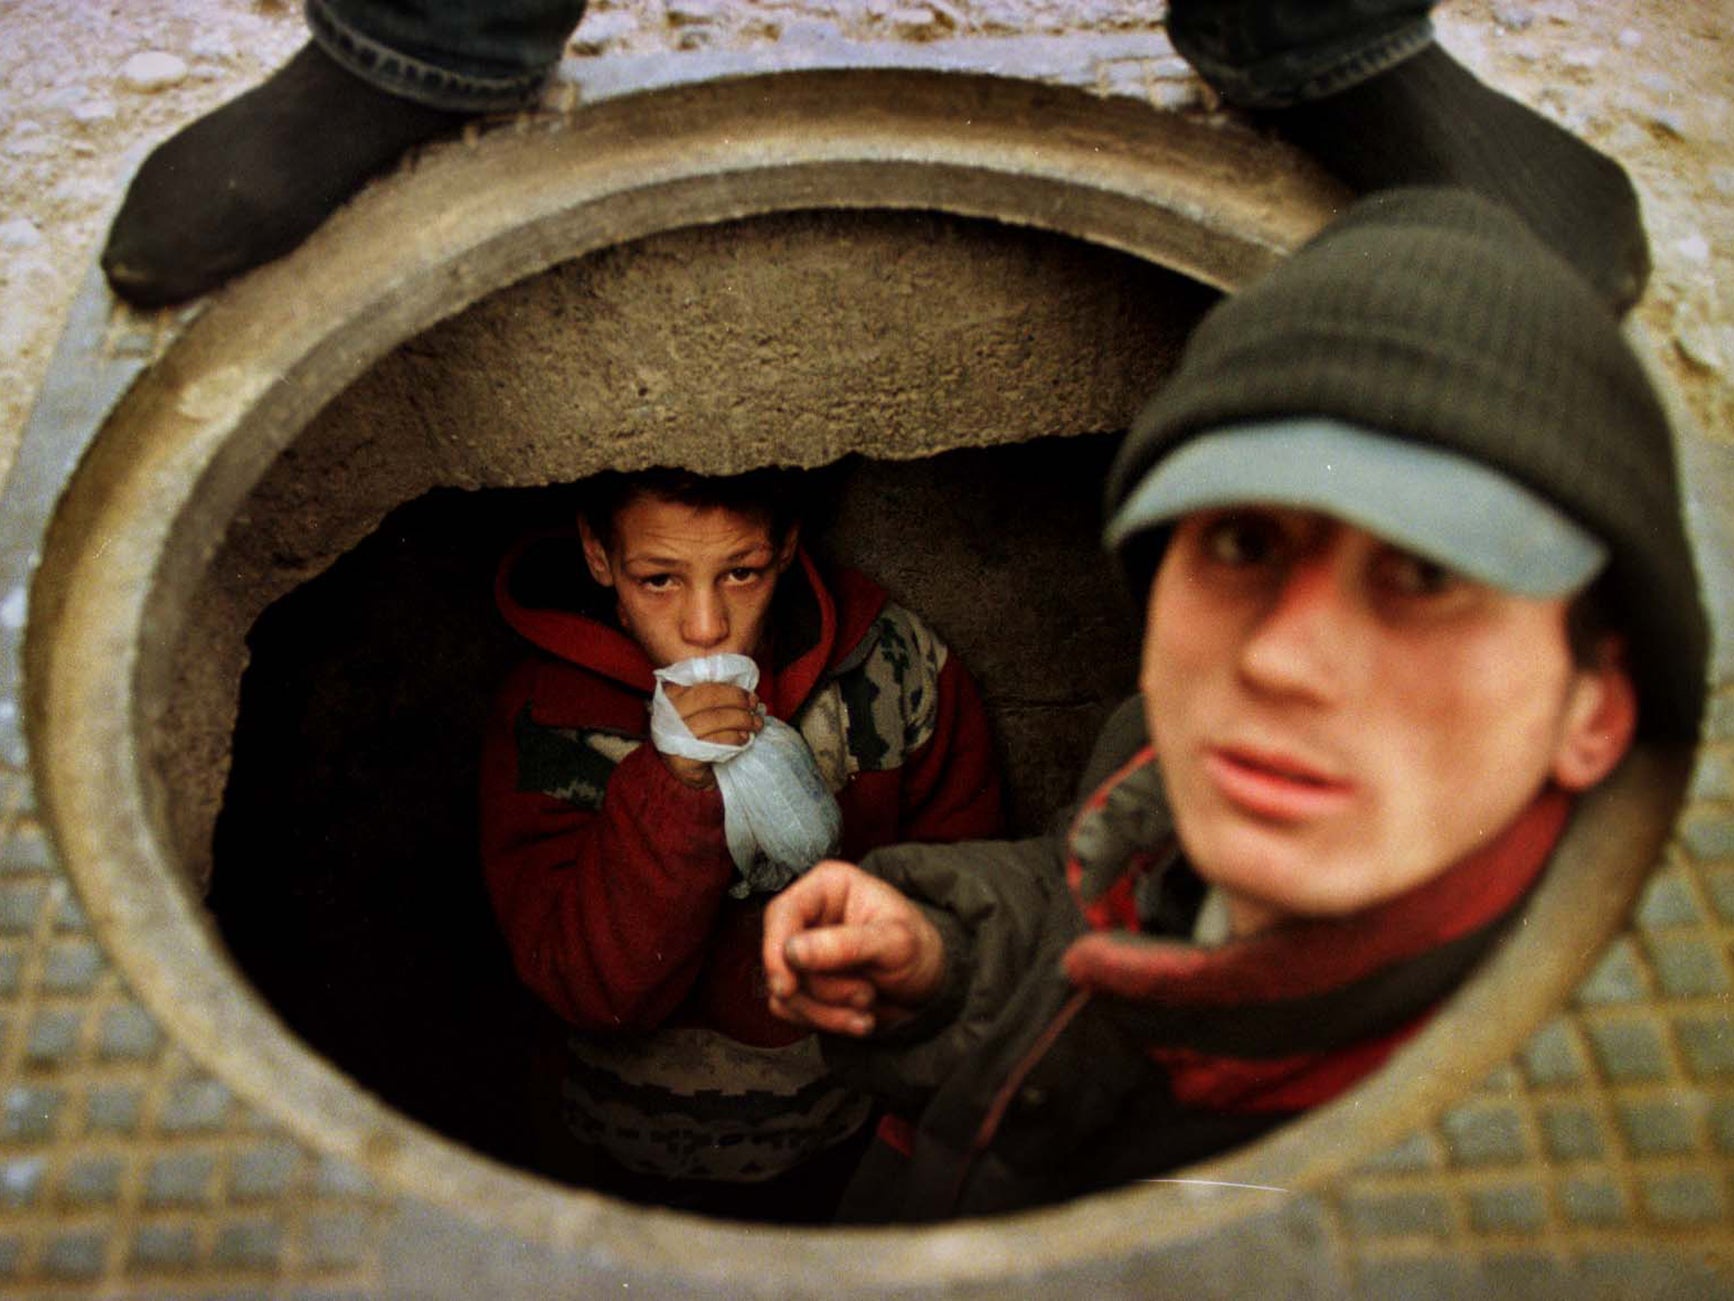 Going underground: 13-year-old Bogdan prefers to live in a Bucharest sewer than go back to the orphanage where he was beaten